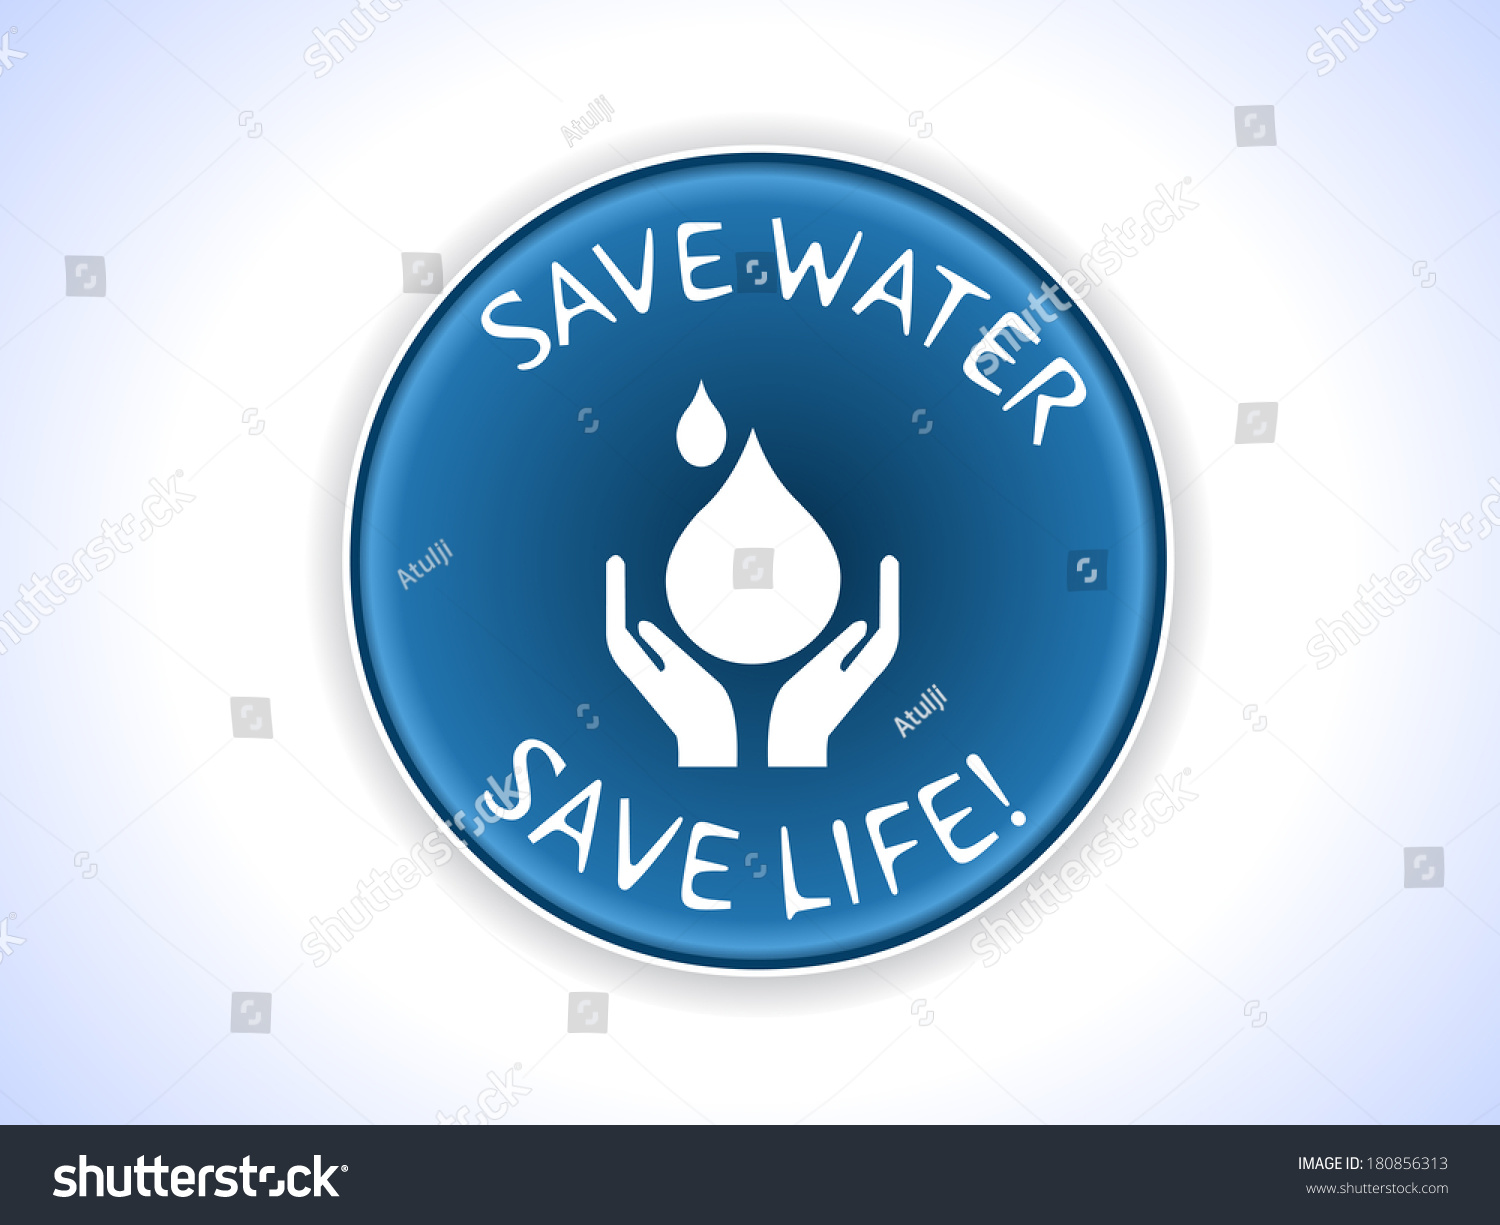 Save water save life essay